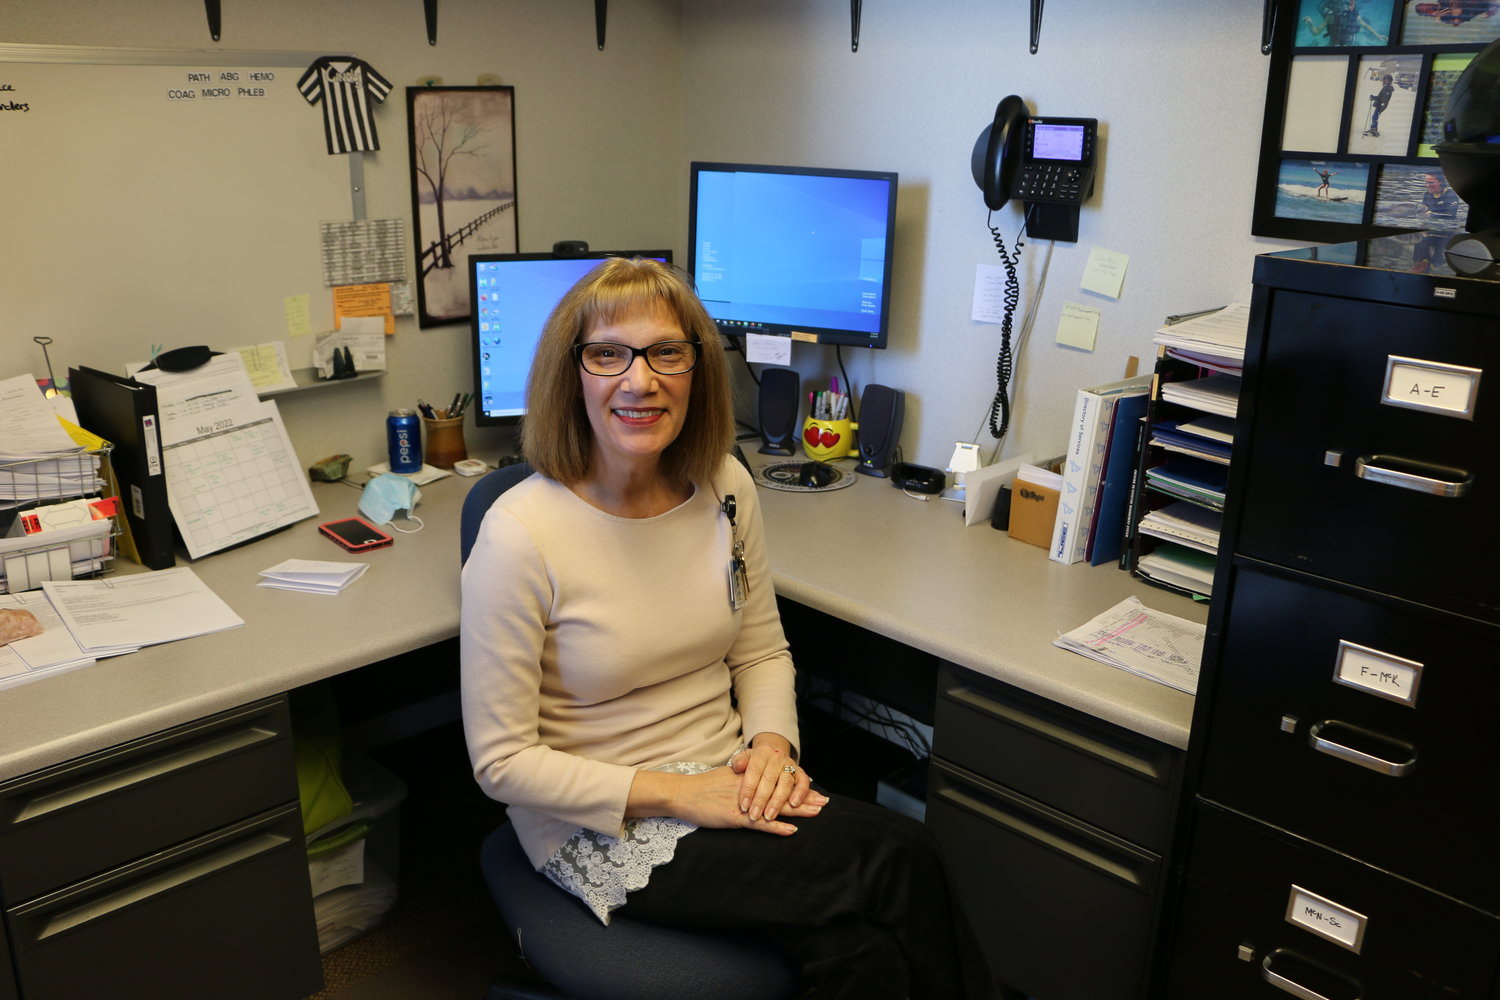 Cindy McKeon, Bothwell Regional Health Center’s Laboratory Services director, has been named a QHR representative to HealthTrust’s Laboratory Advisory Board for a three-year term.